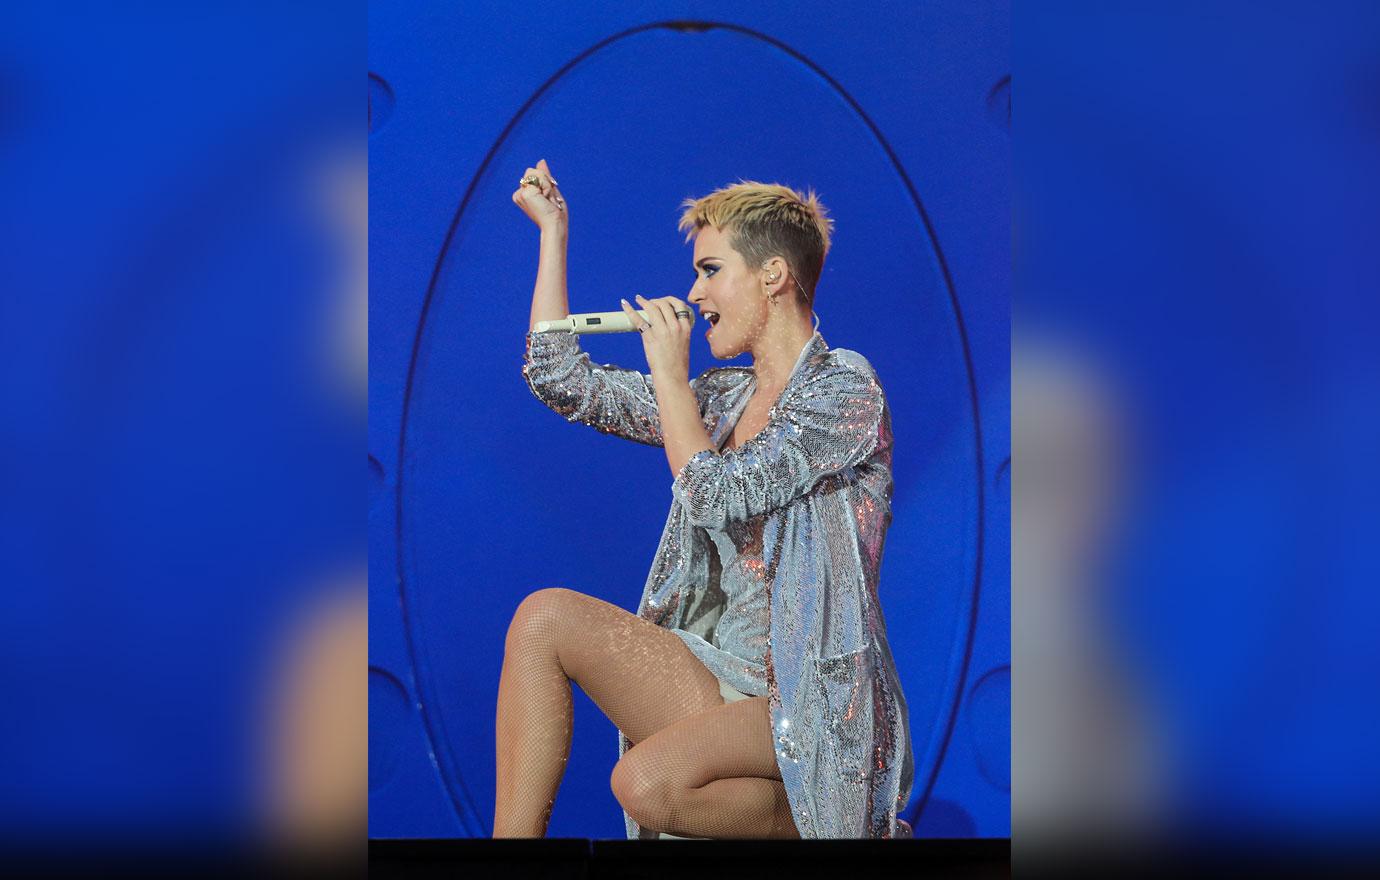 PICS] Katy Perry Suffers A Wardrobe Malfunction With Her Panties